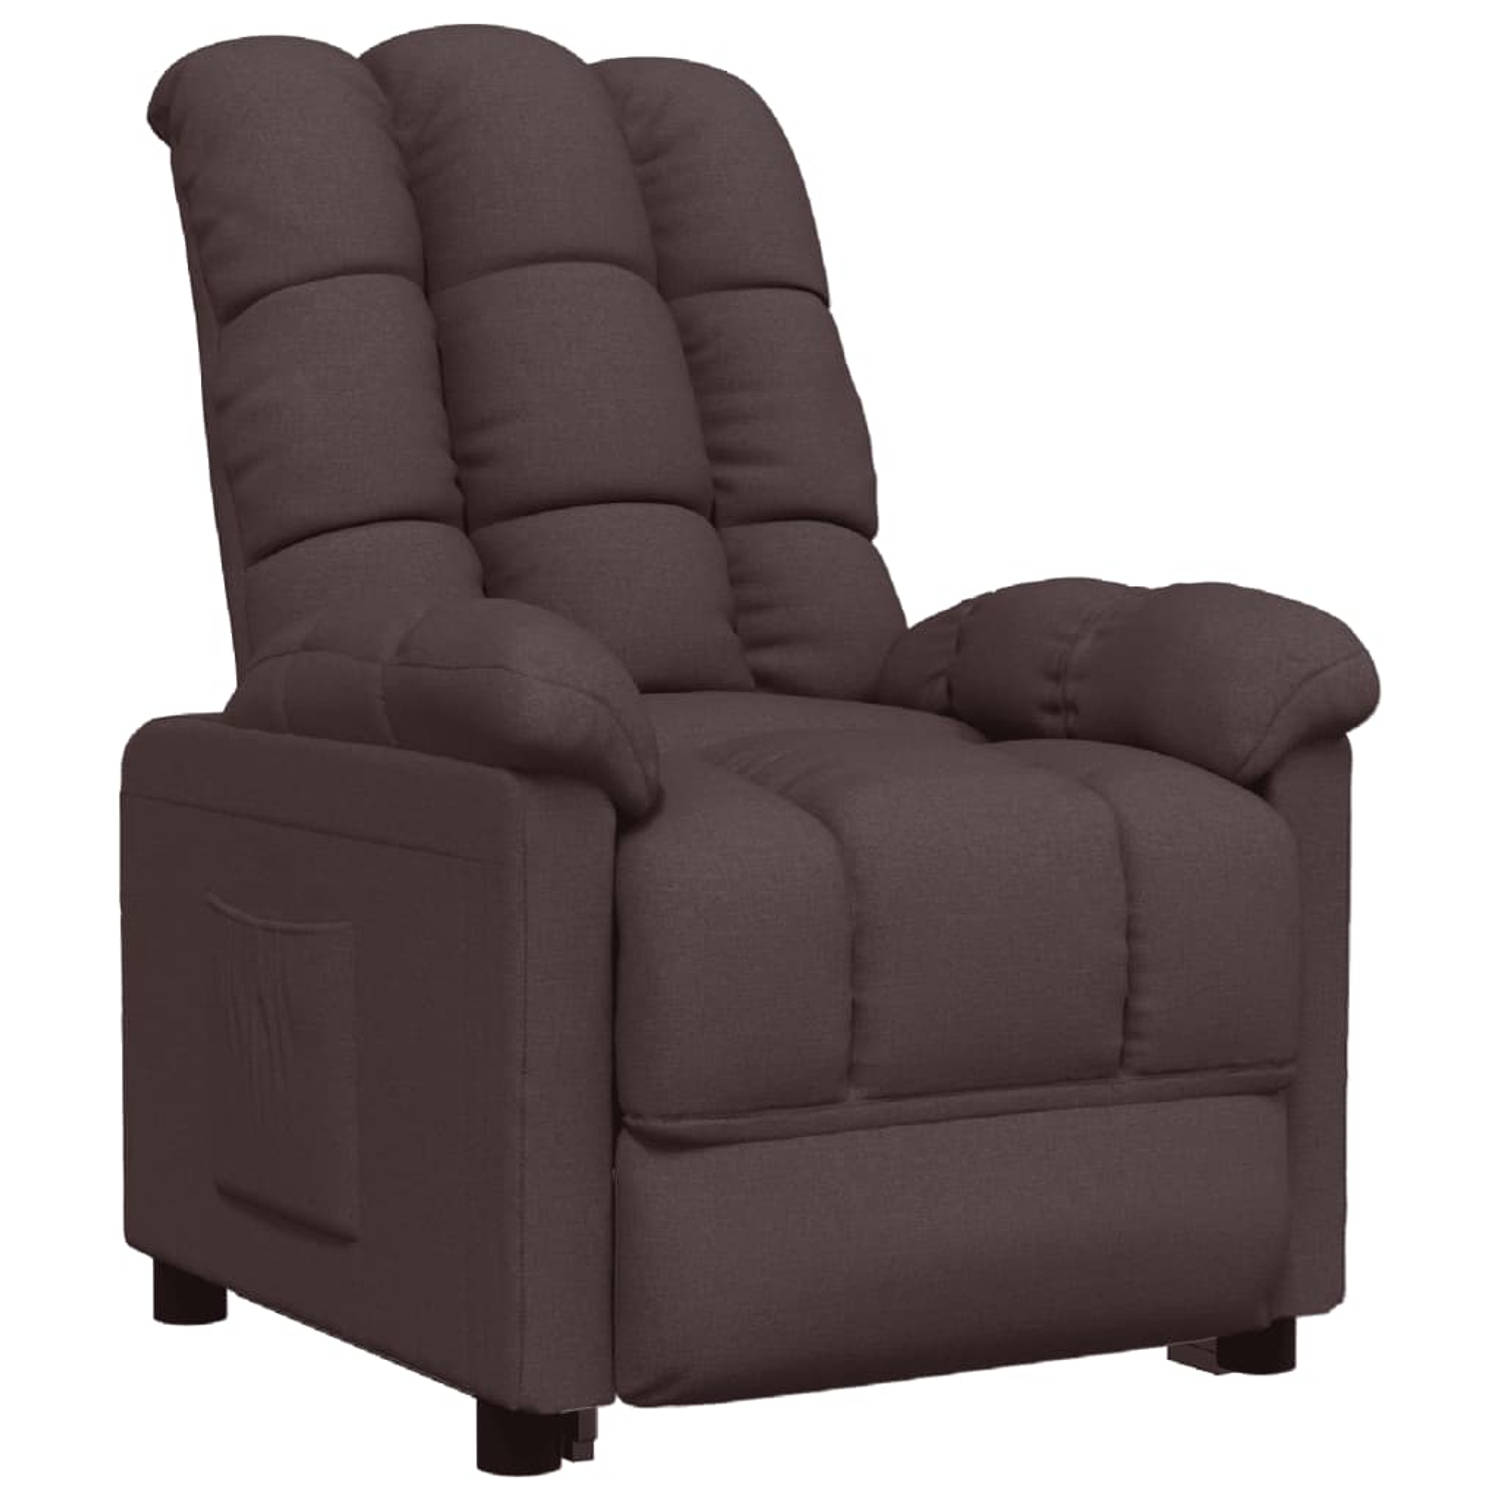 The Living Store Verstelbare Stoel - Fauteuil - Stof - 74 x 99 x 102 cm - Donkerbruin